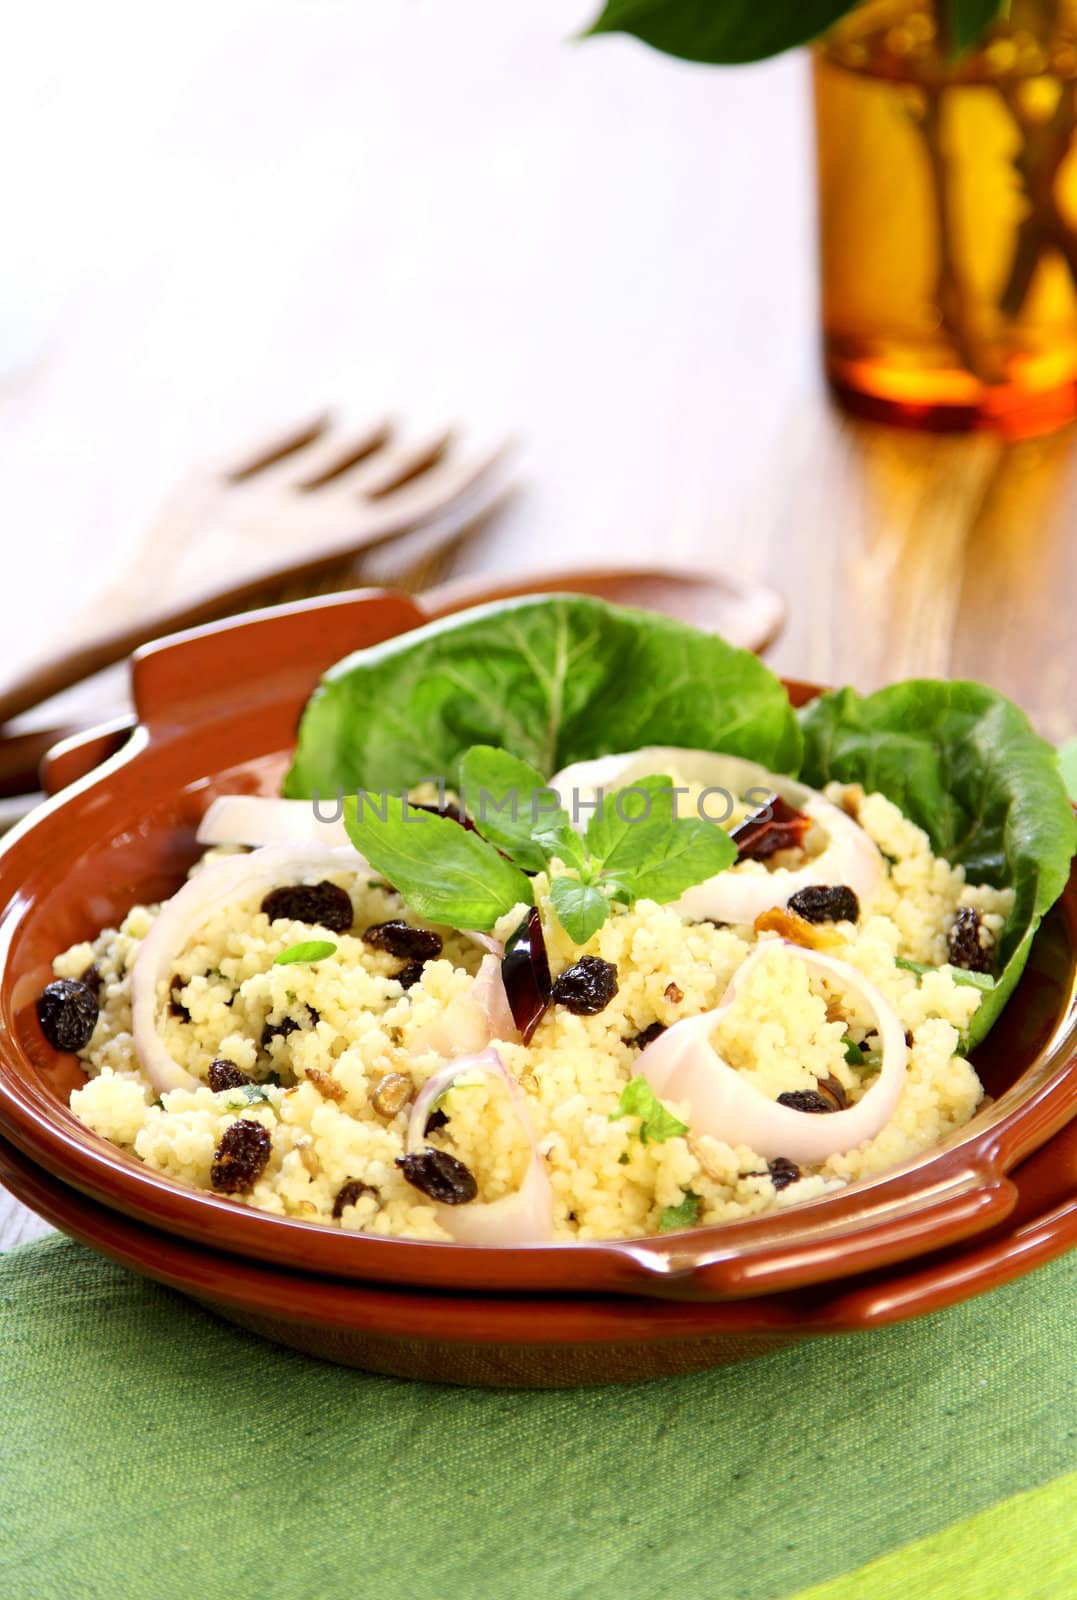 Couscous salad with raisin,onion and mint salad